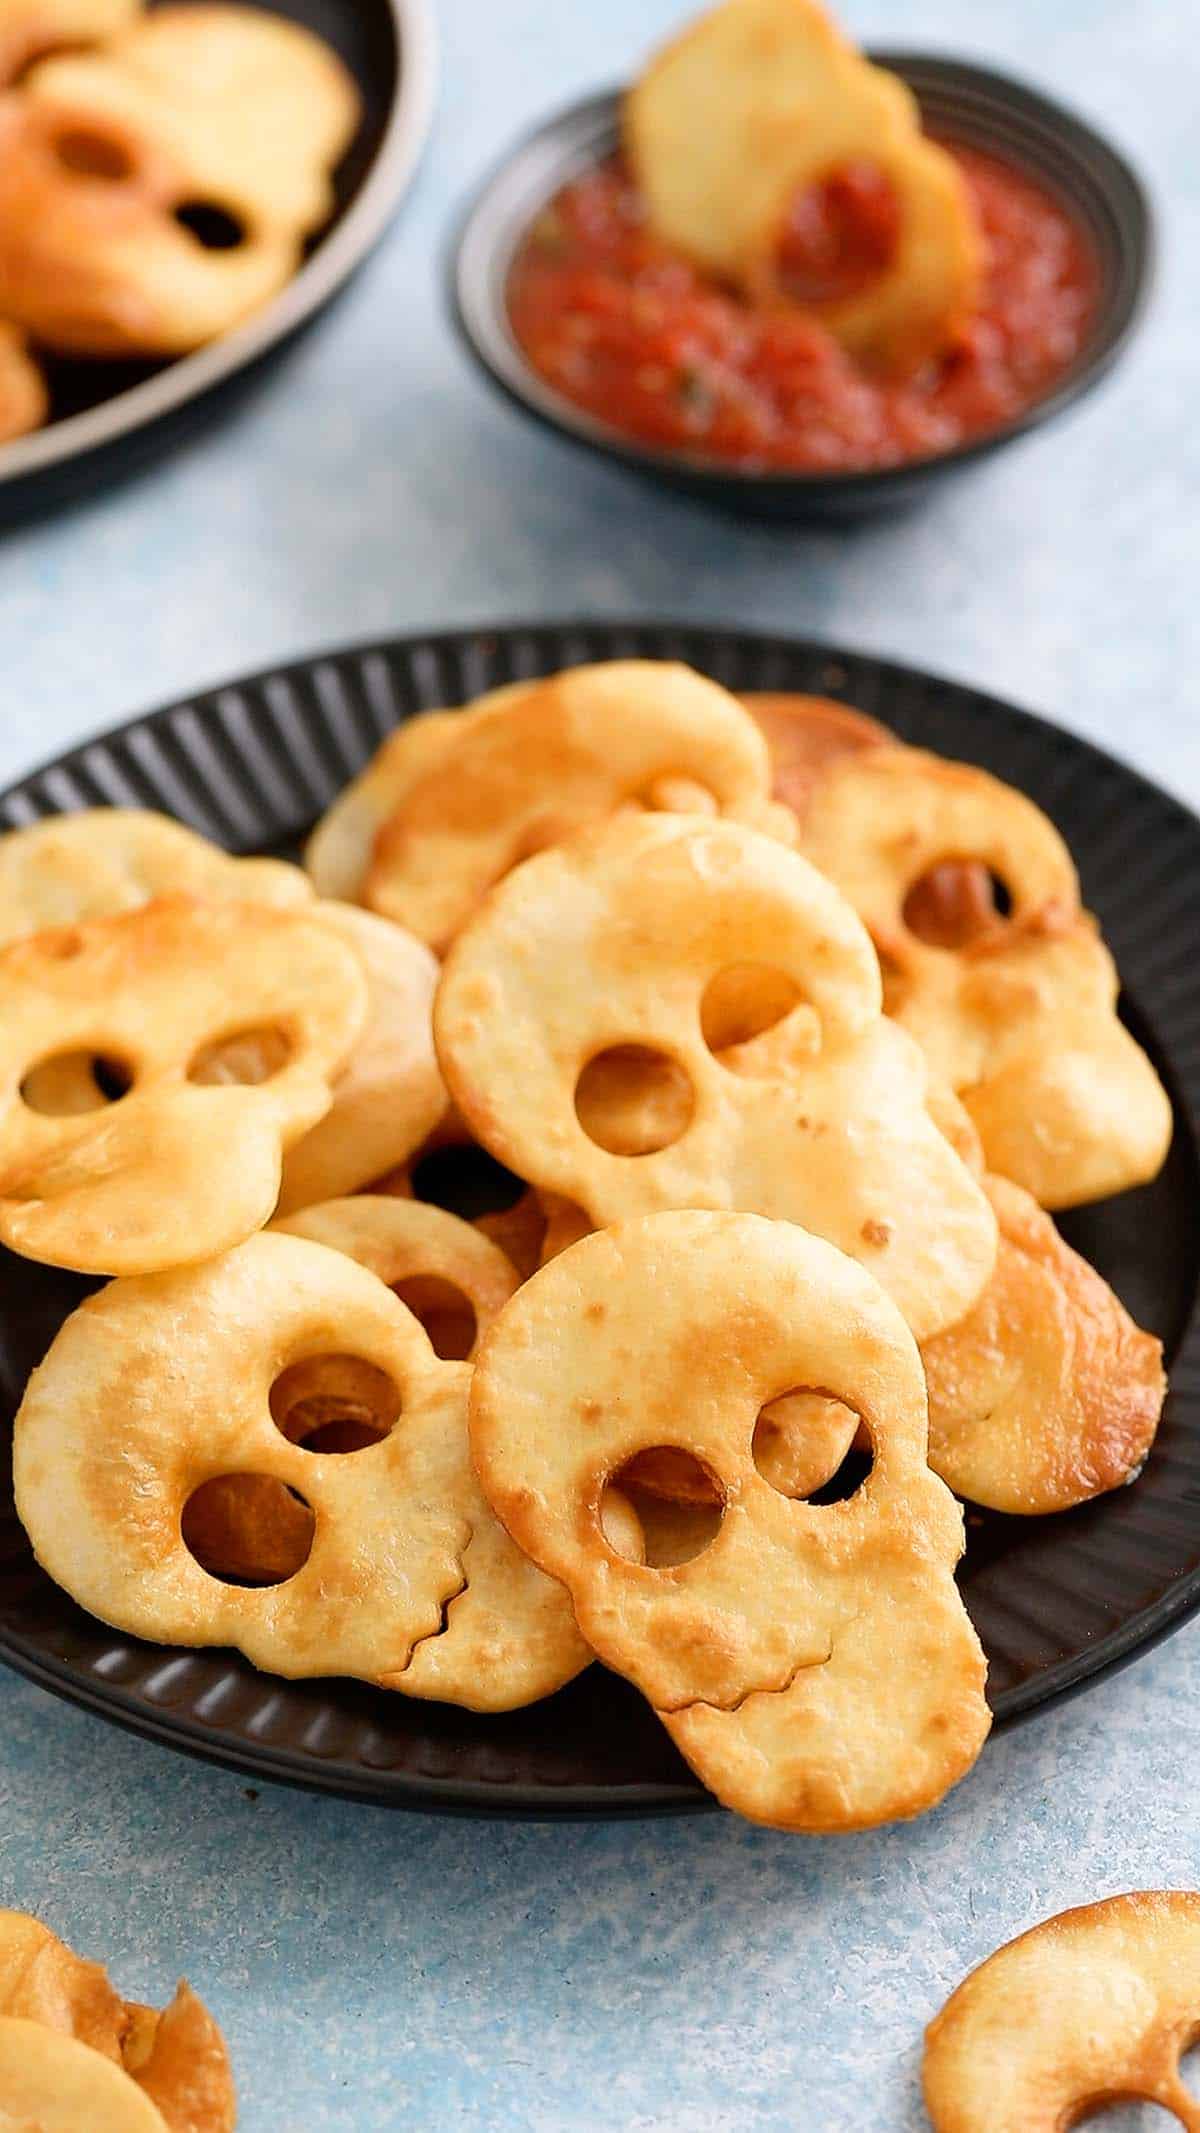 Skull shaped tortilla chips piled on a round black plate.